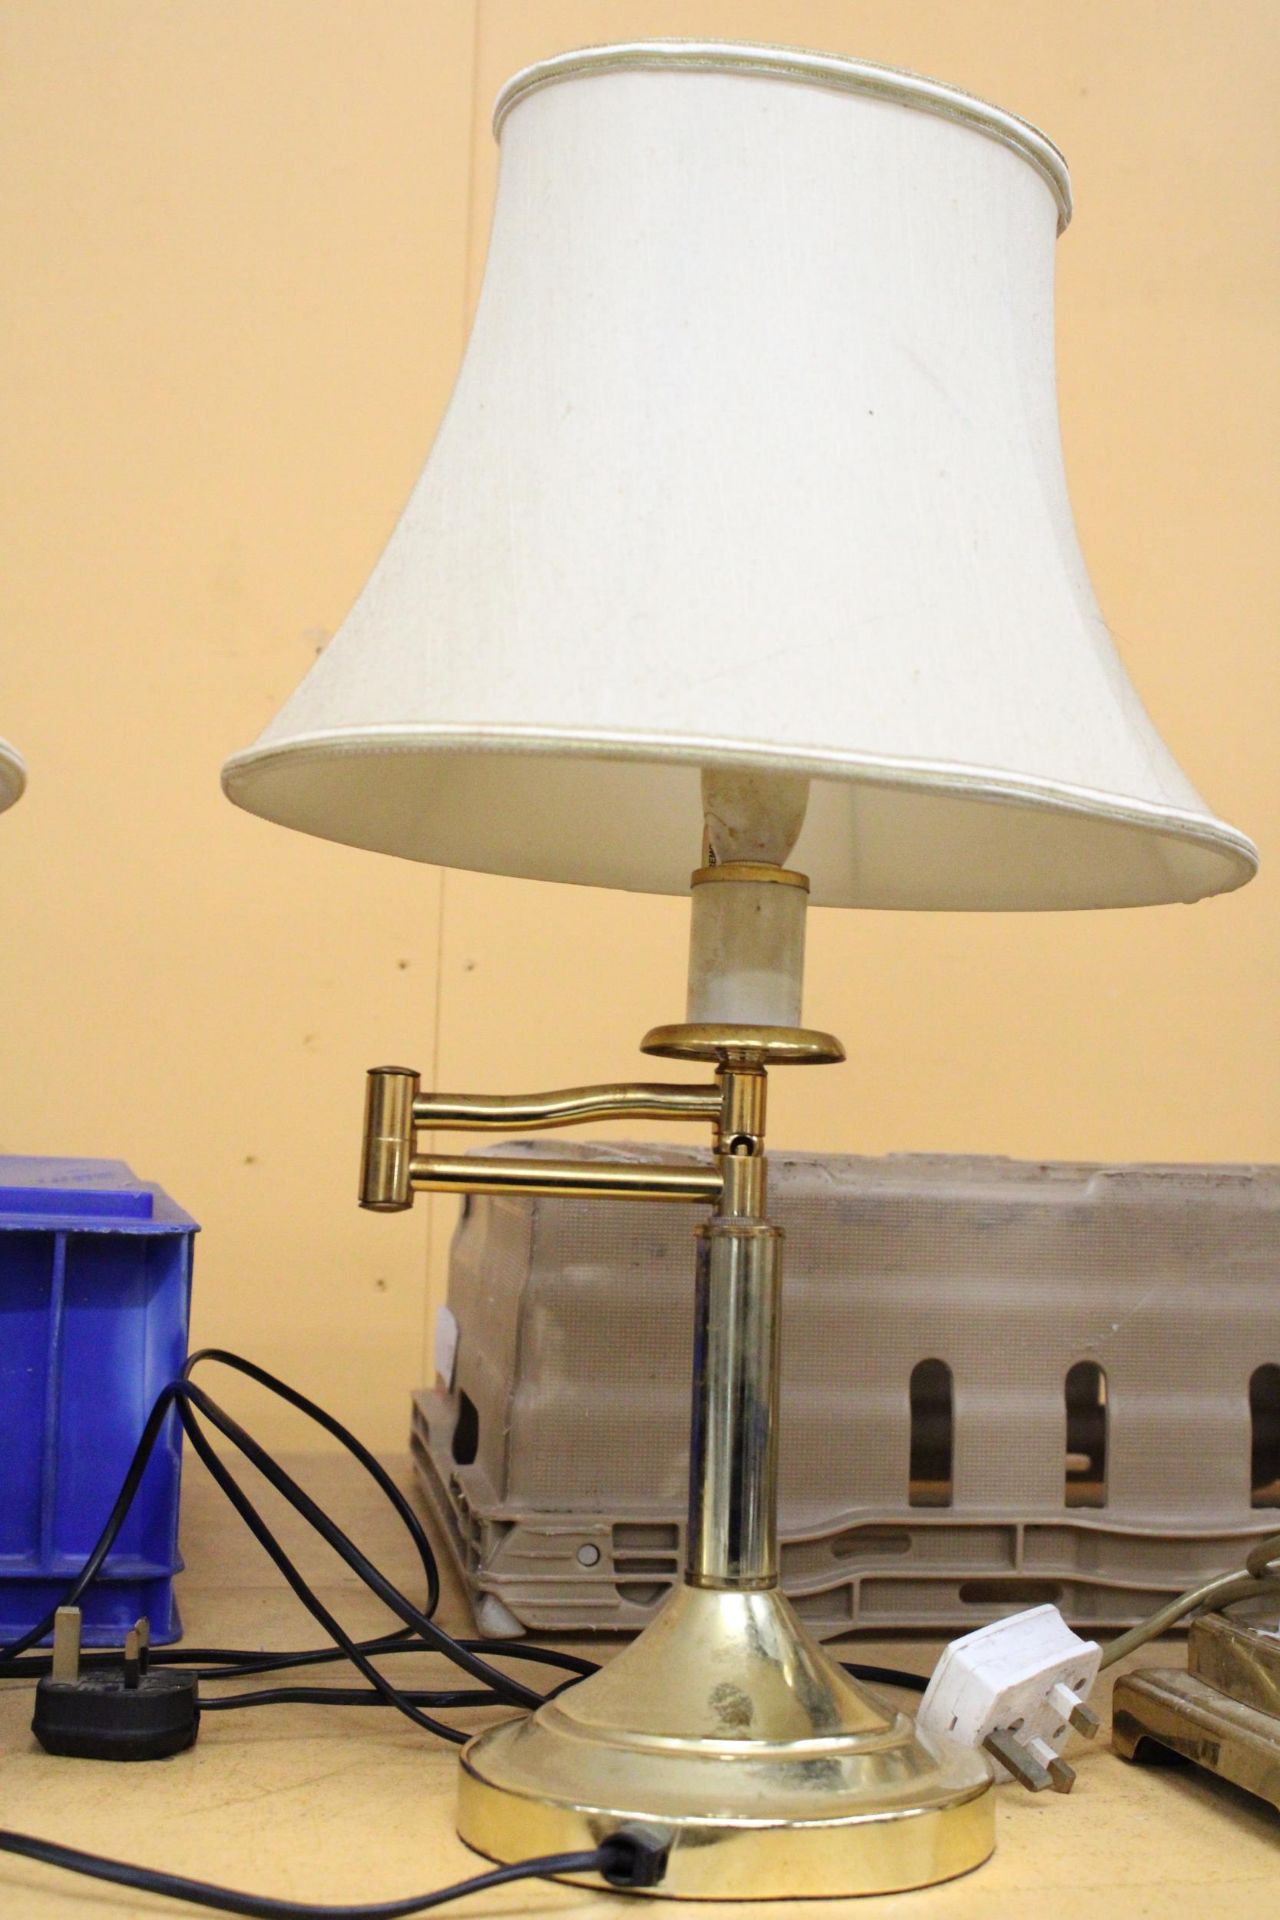 A PAIR OF VINTAGE SWING ARM BRASS LAMPS WITH SHADES - Image 3 of 5